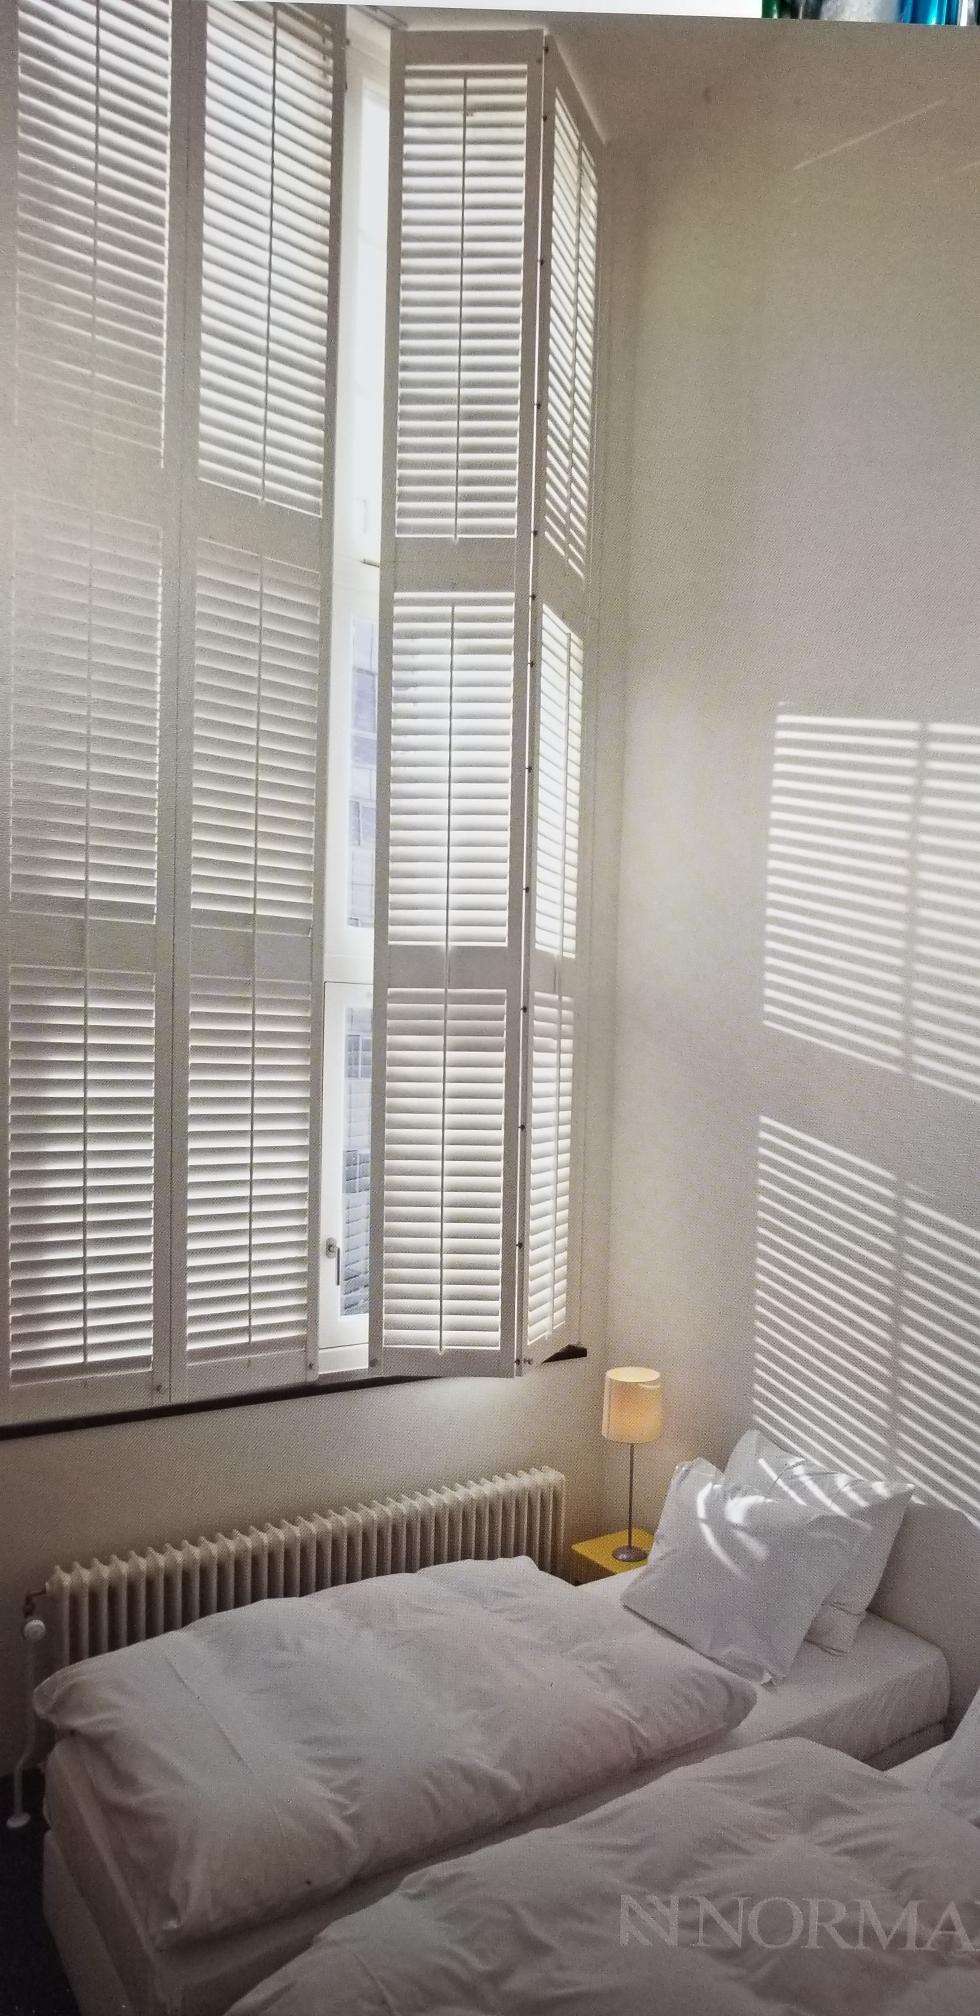 Blinds Photo Example